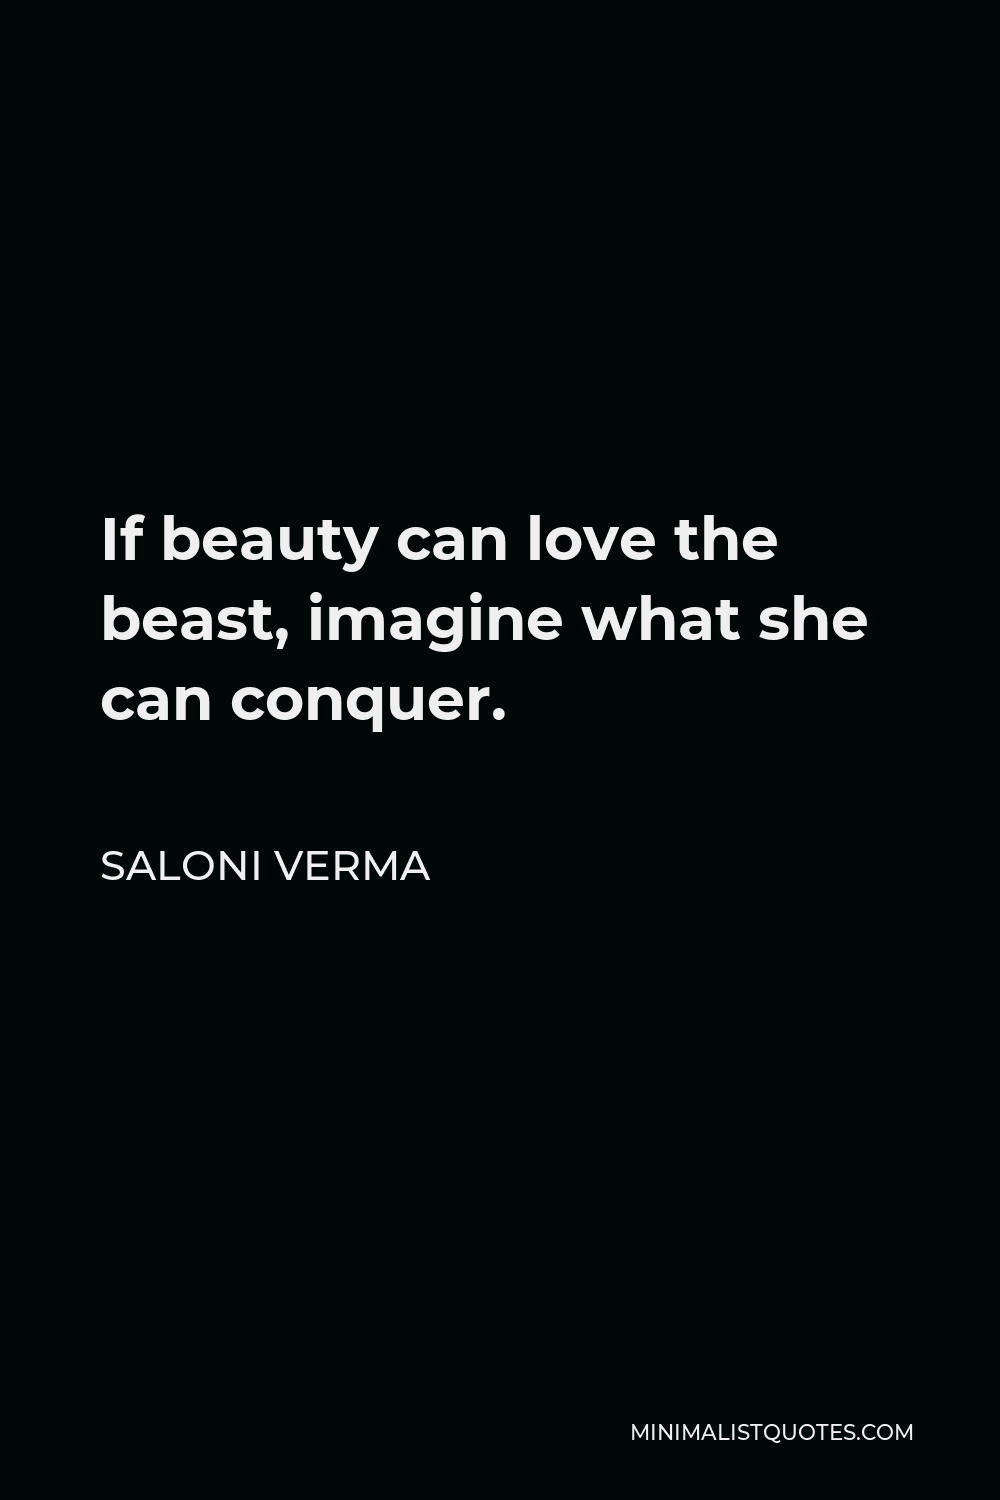 Saloni Verma Quote - If beauty can love the beast, imagine what she can conquer.